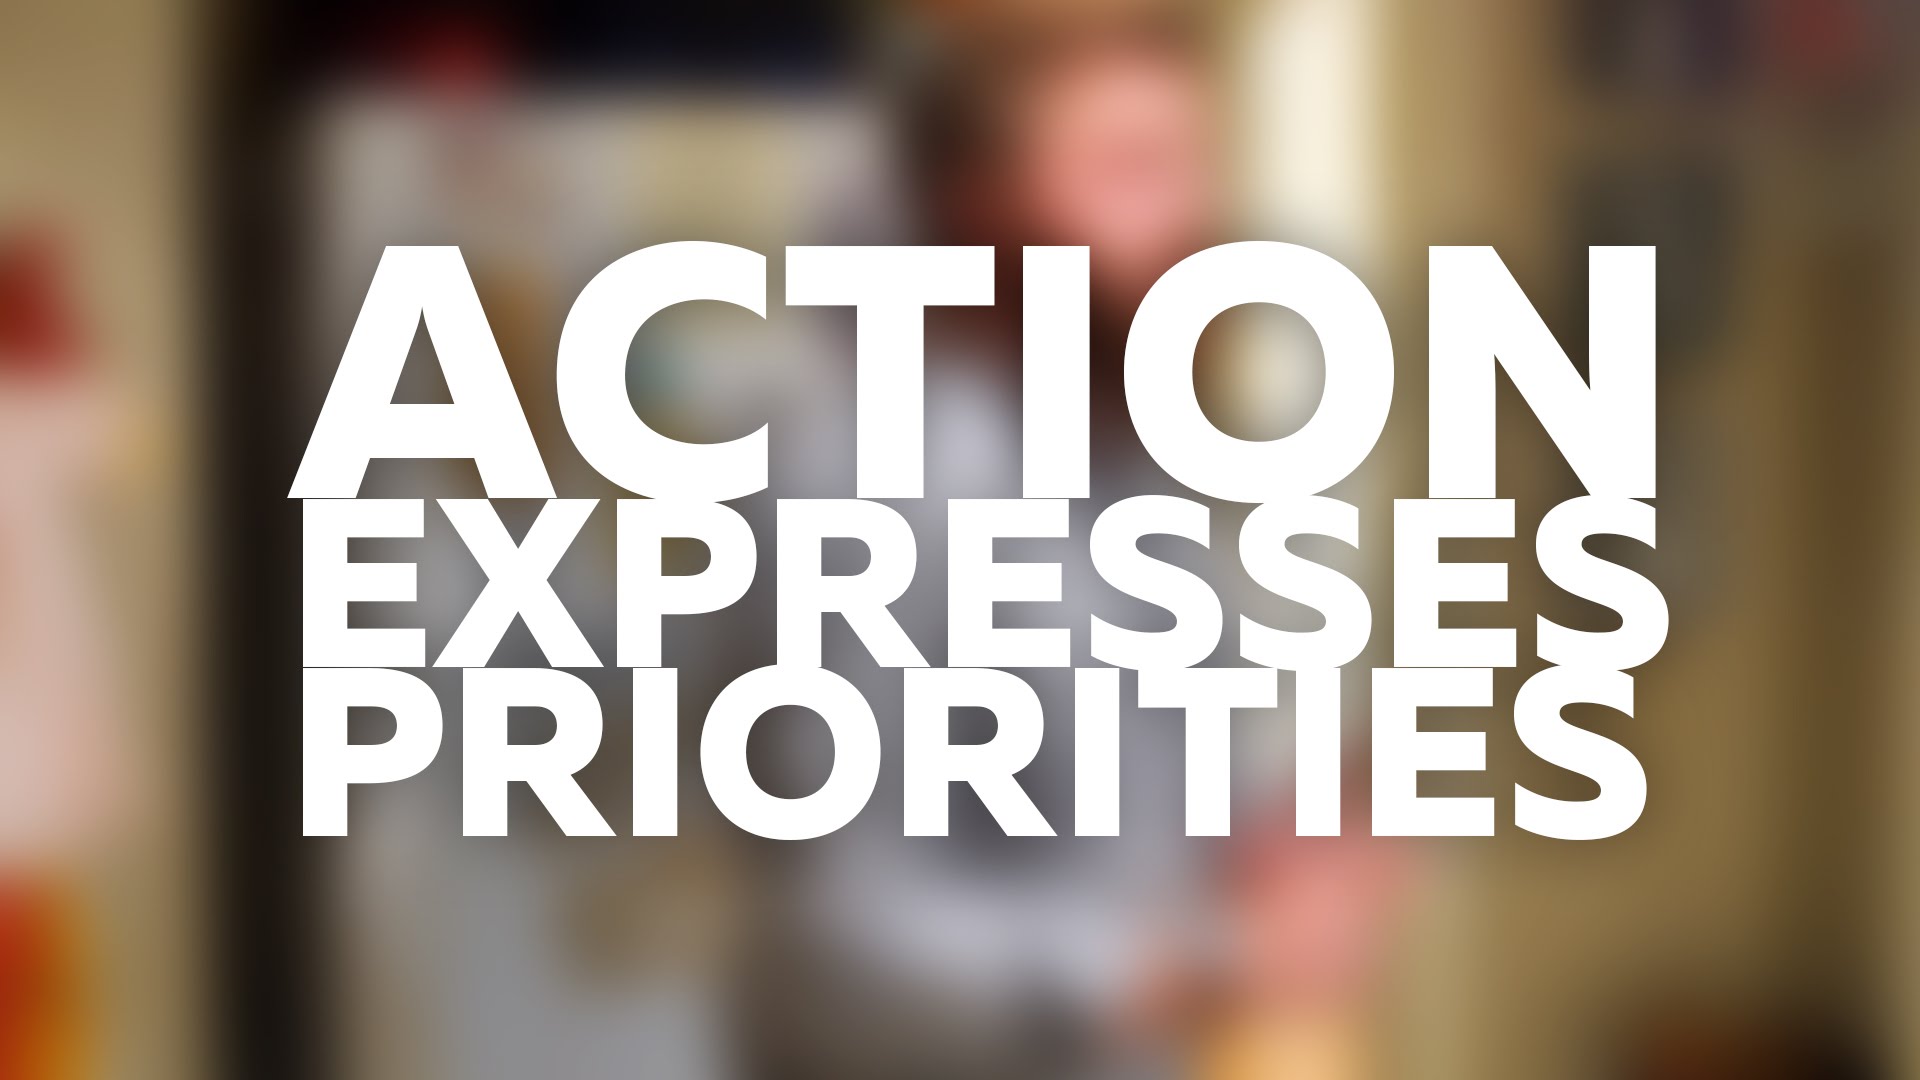 Action expresses priorities (22)